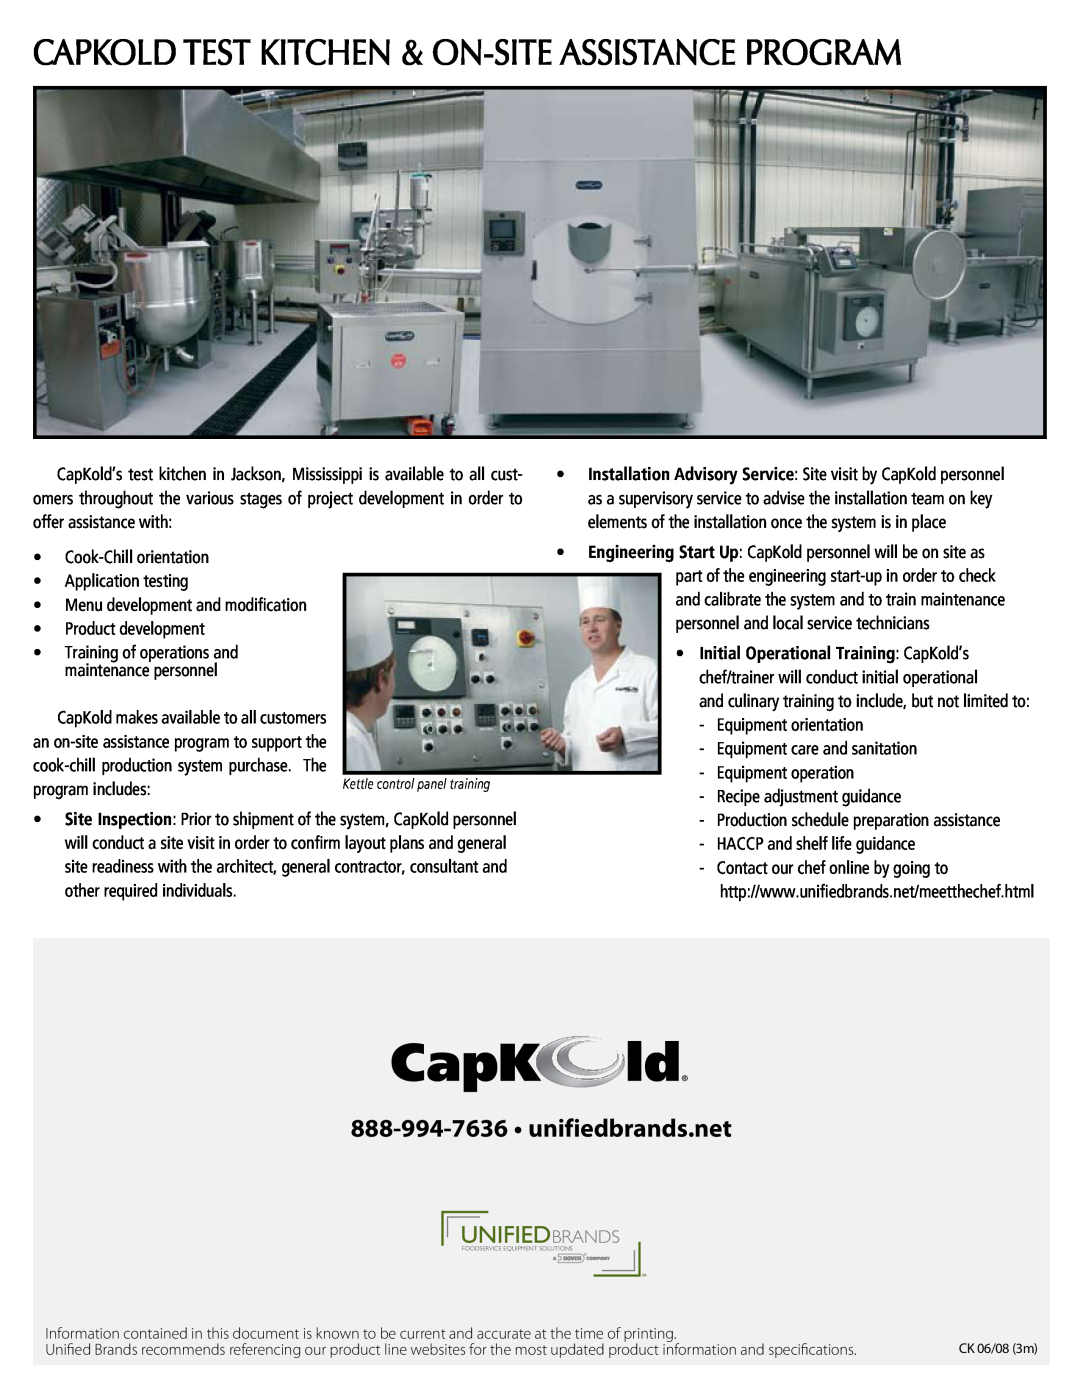 Unified Brands Cook-Chill Production Systems manual Initial Operational Training CapKold’s, unifiedbrands.net 